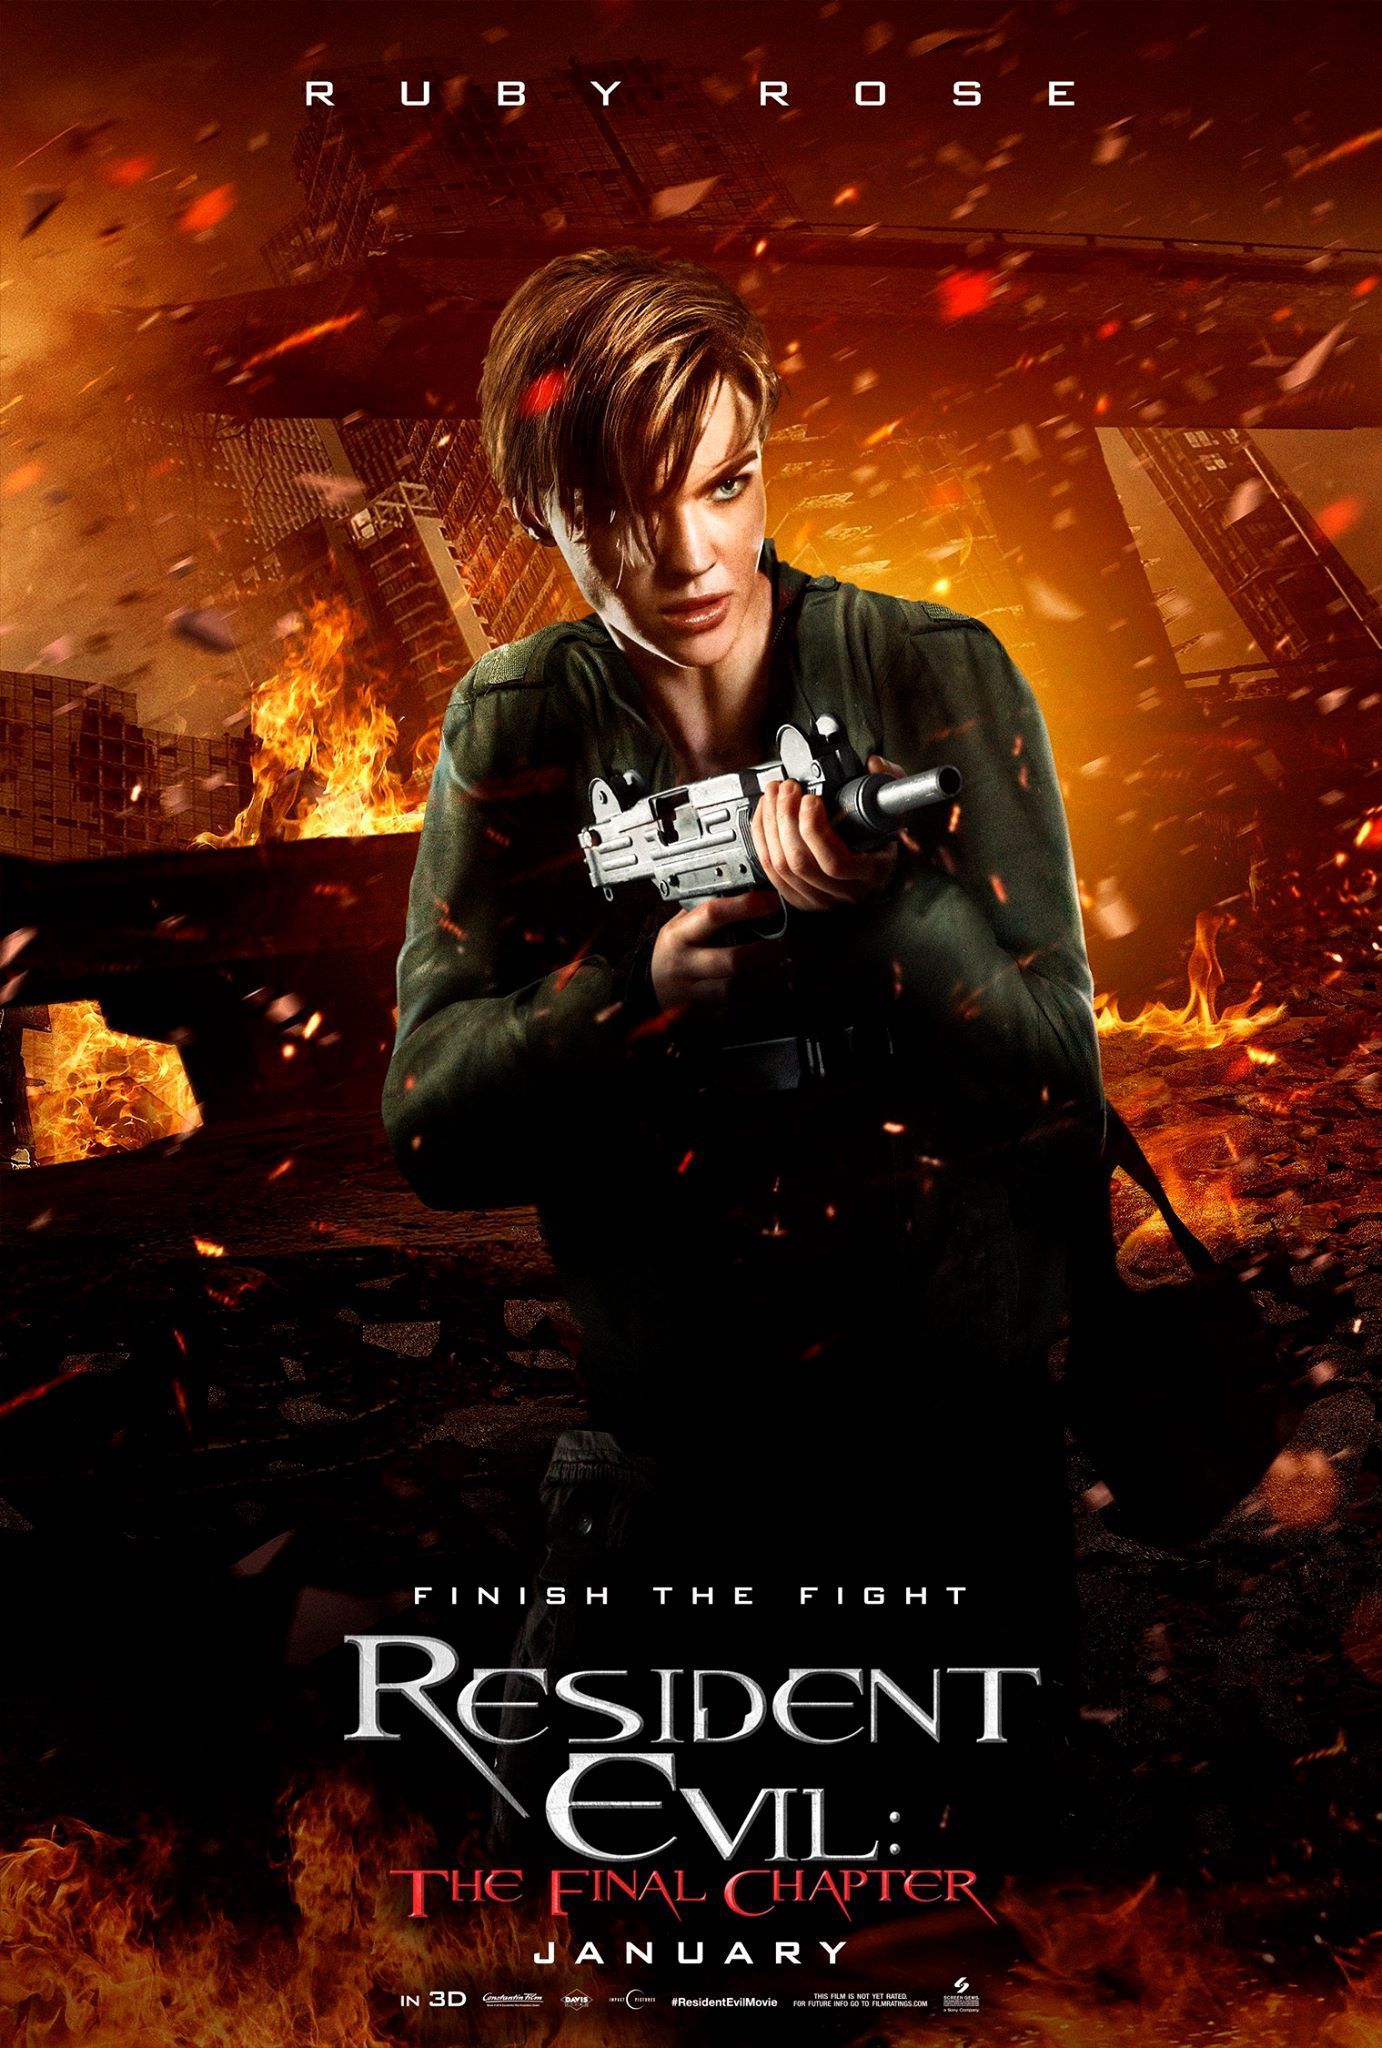 Resident Evil The Final Chapter - Ruby Rose poster